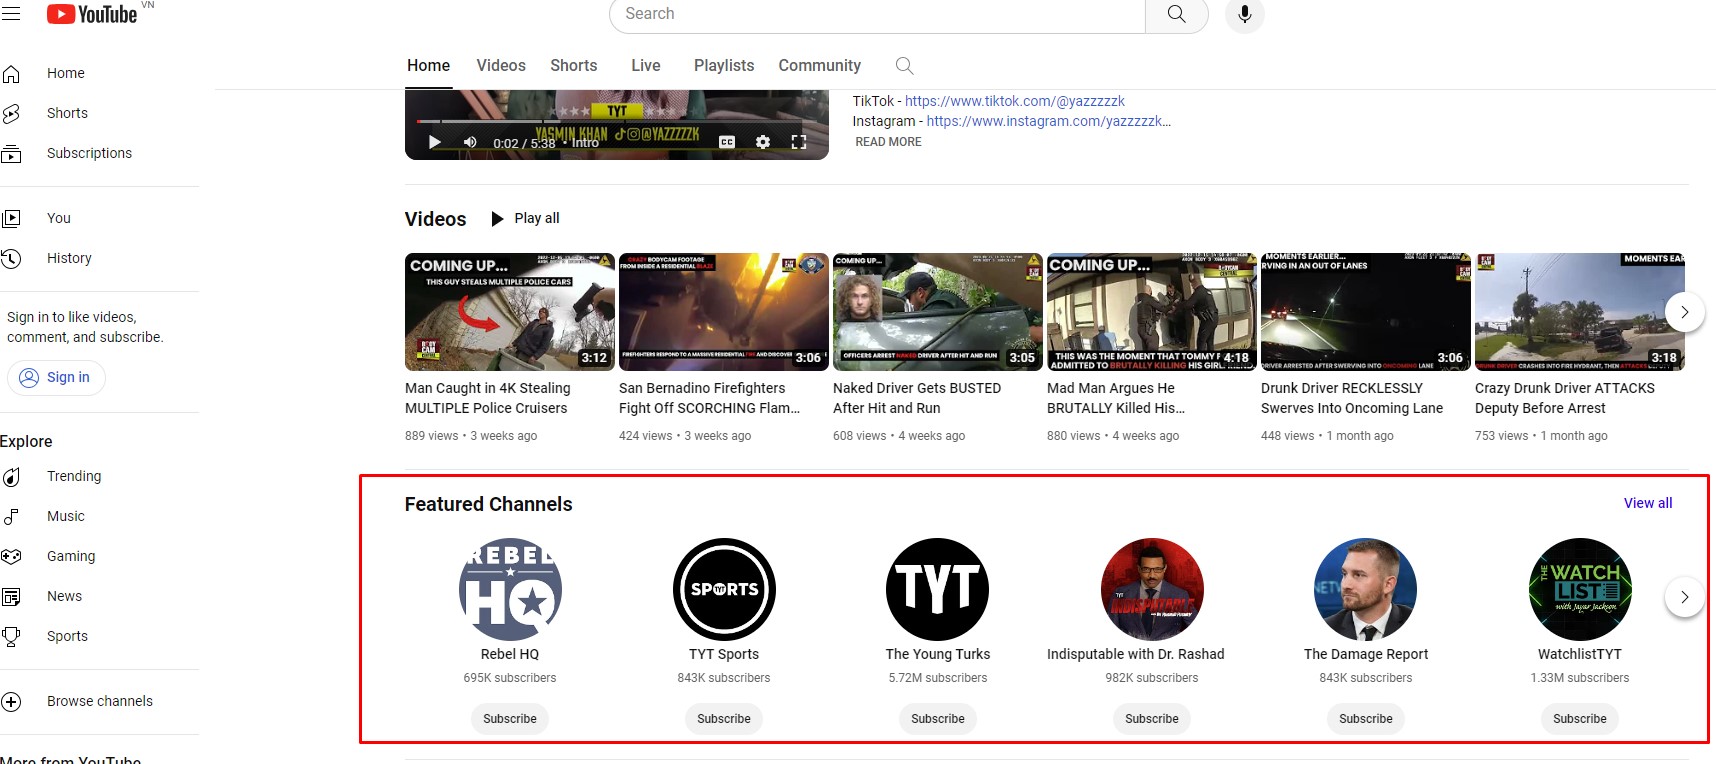 Feature Channels on YouTube